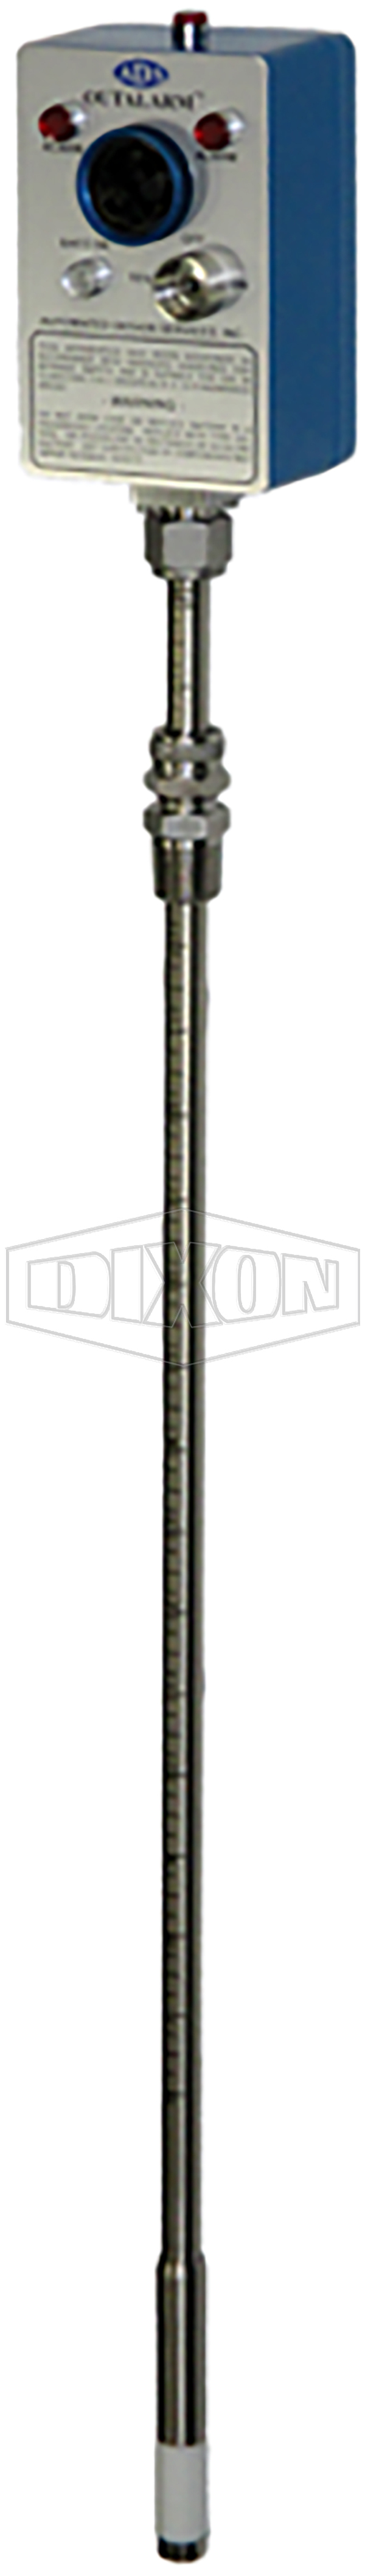 Dixon A100C24A ADS Outalarm with Capacitance Probe 24 Long 1/2 NPT Gland Standard 